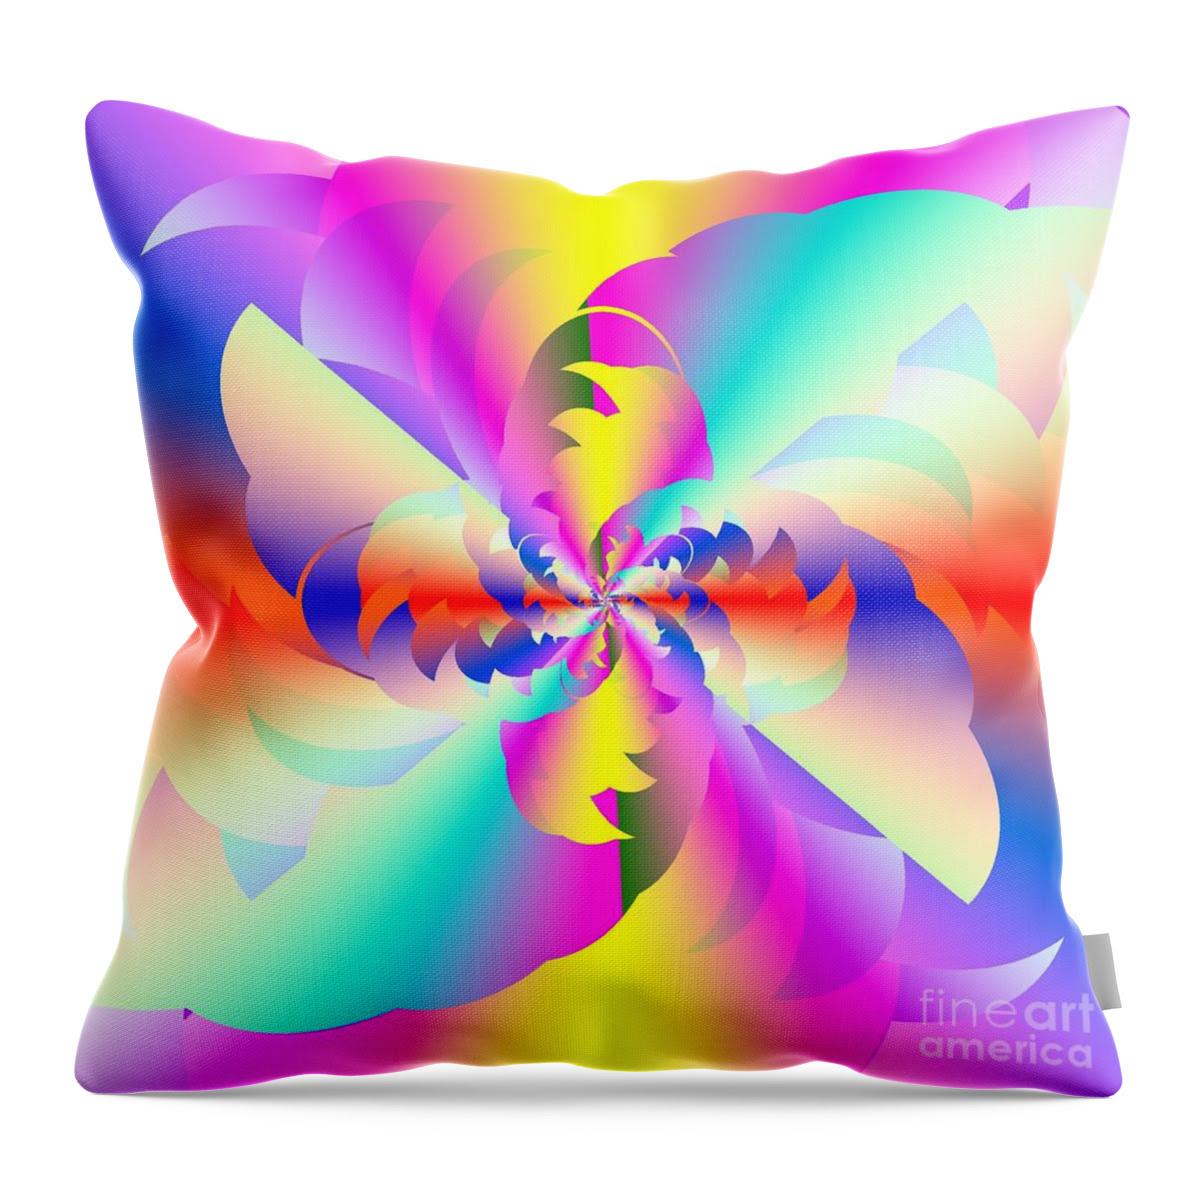 Fractured Fractal Rainbow Throw Pillow featuring the digital art Fractal Rainbow by Michael Skinner